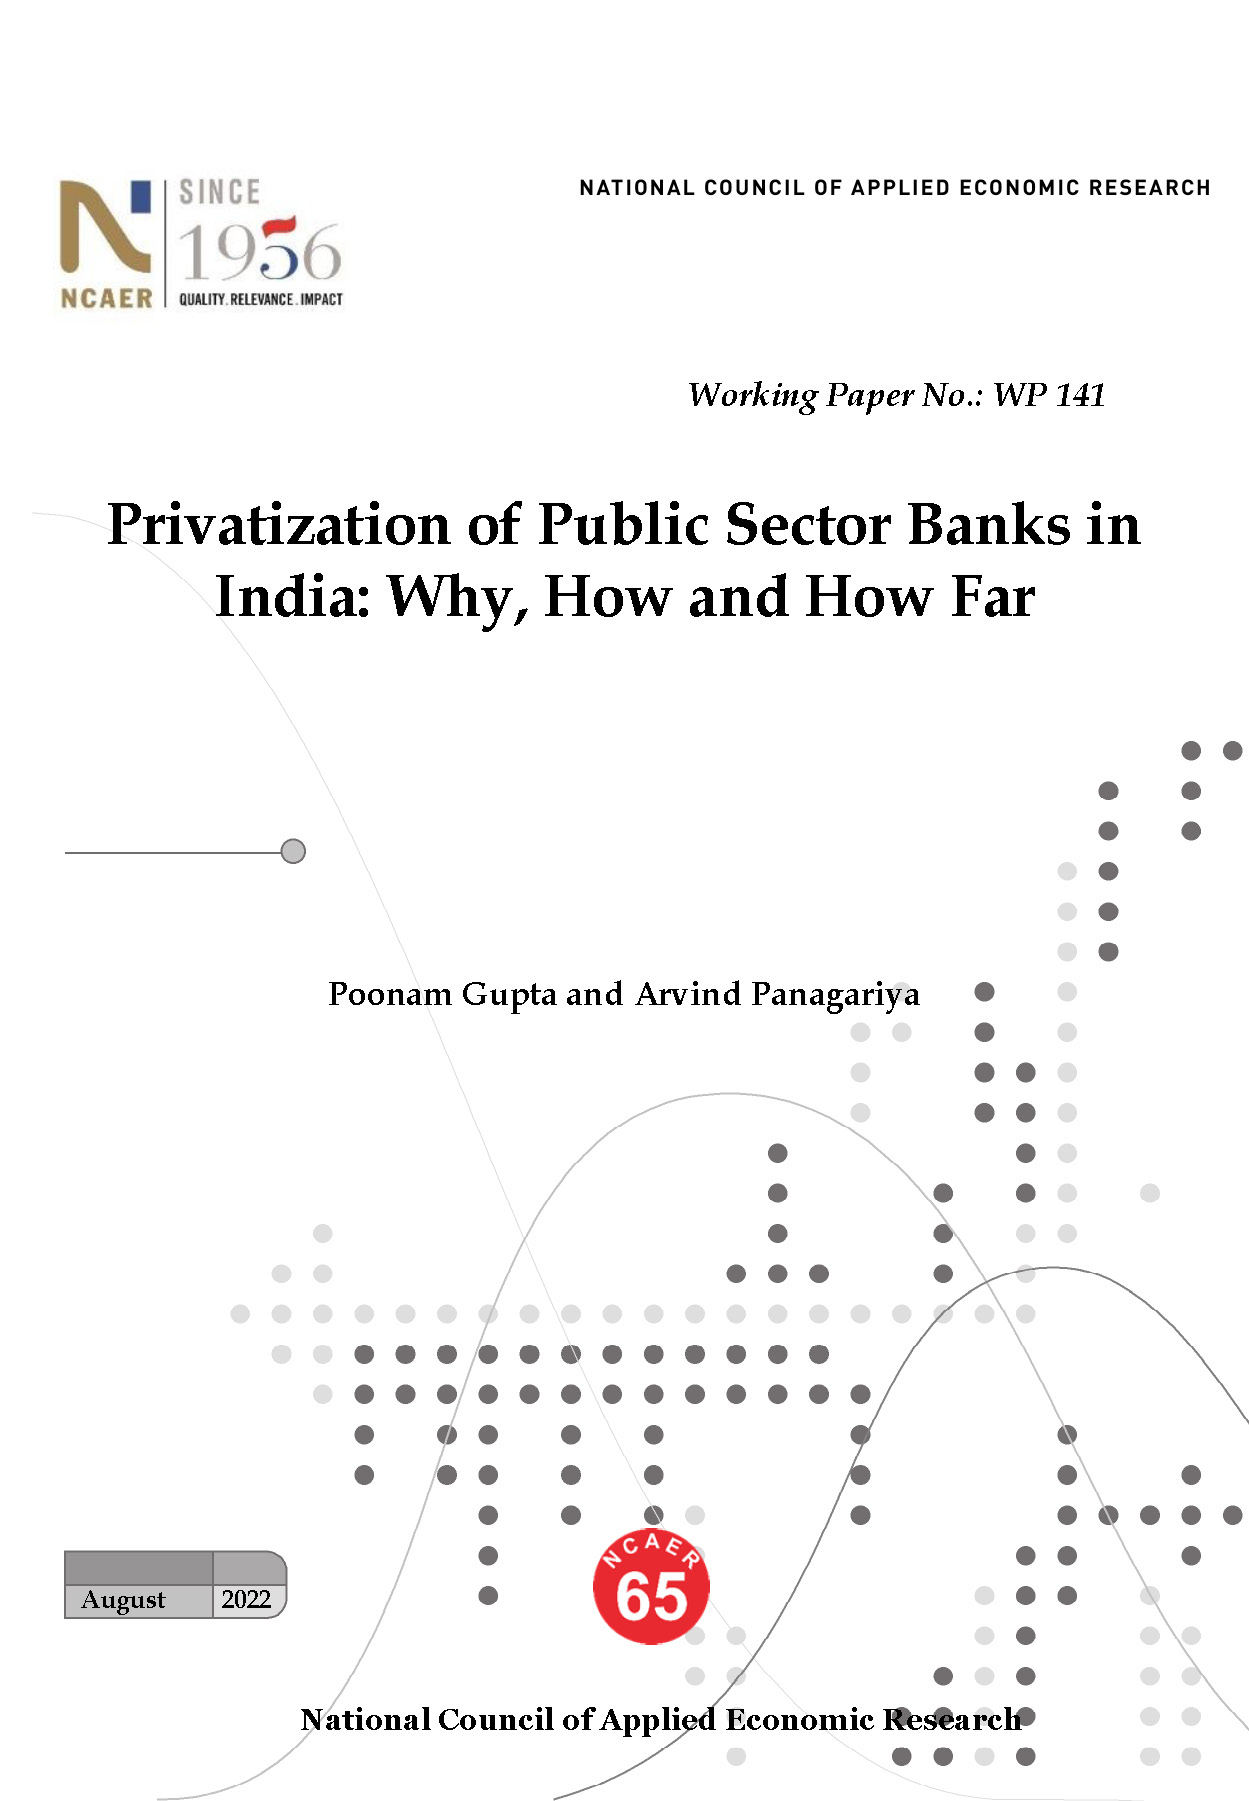 14820Privatization of Public Sector Banks in India: Why, How and How Far